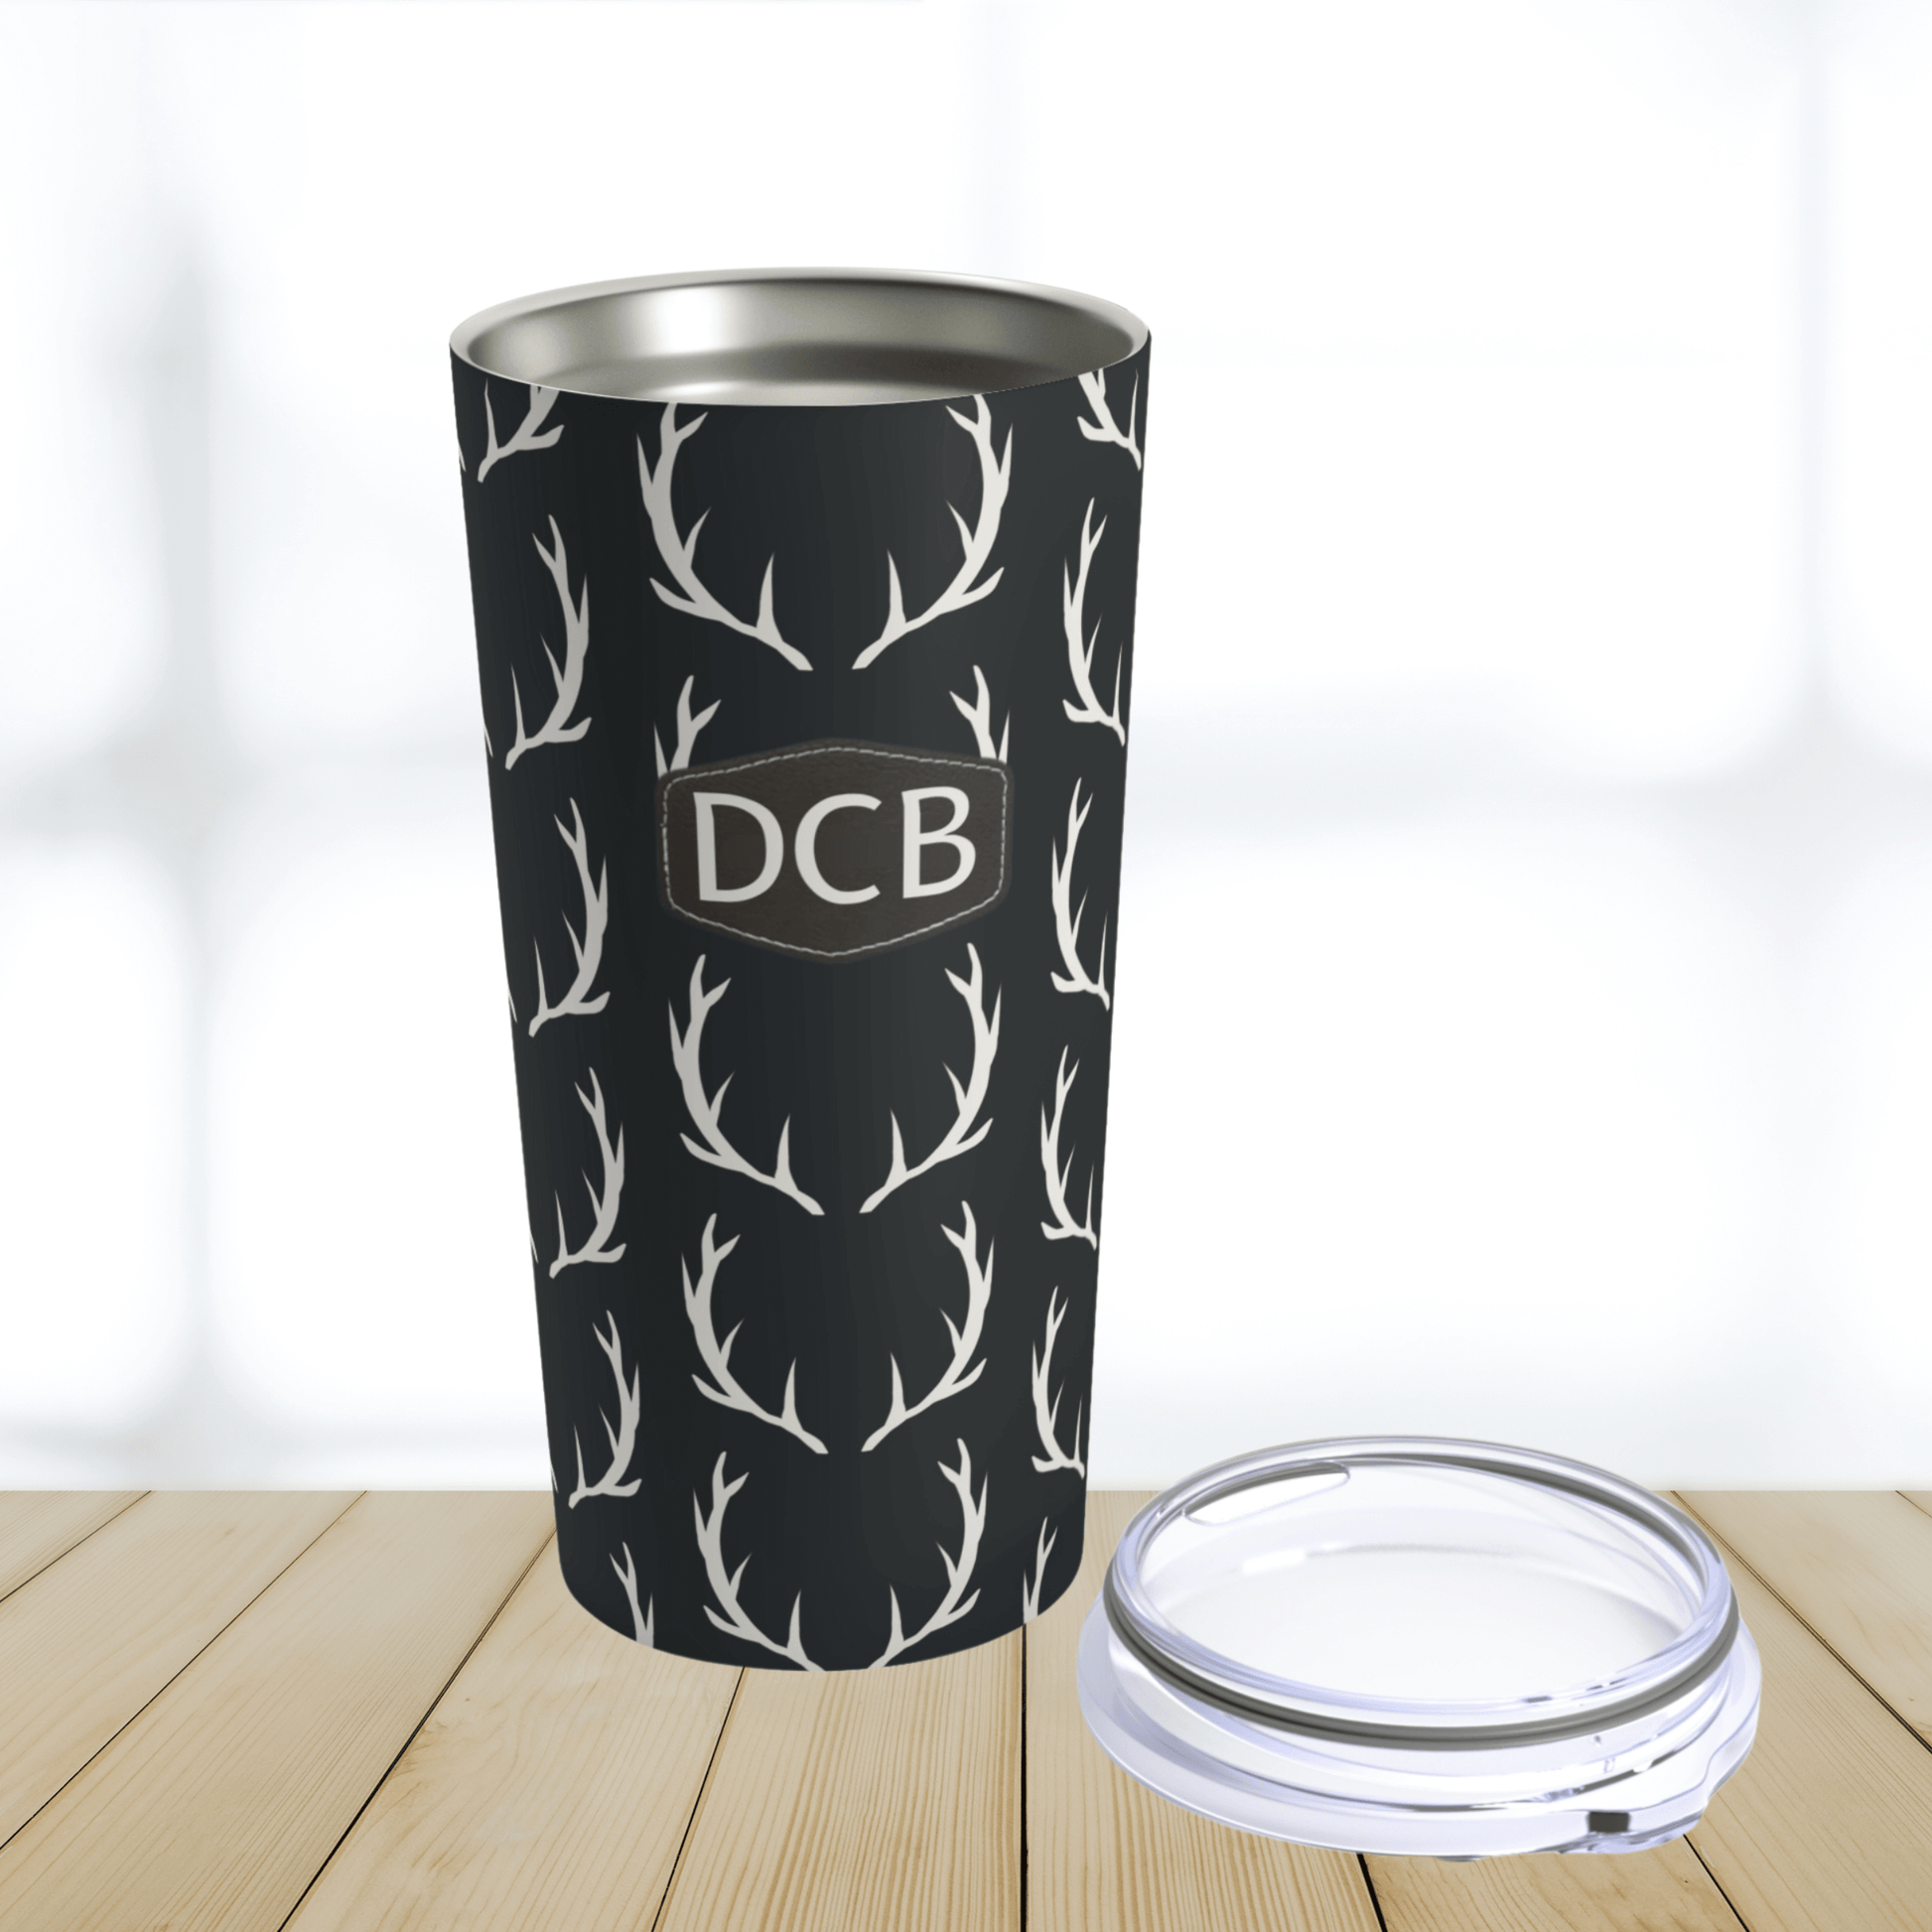 OUr deer antler tumbler cup is a durable stainless steel double wall insulated cup with a clear lid.